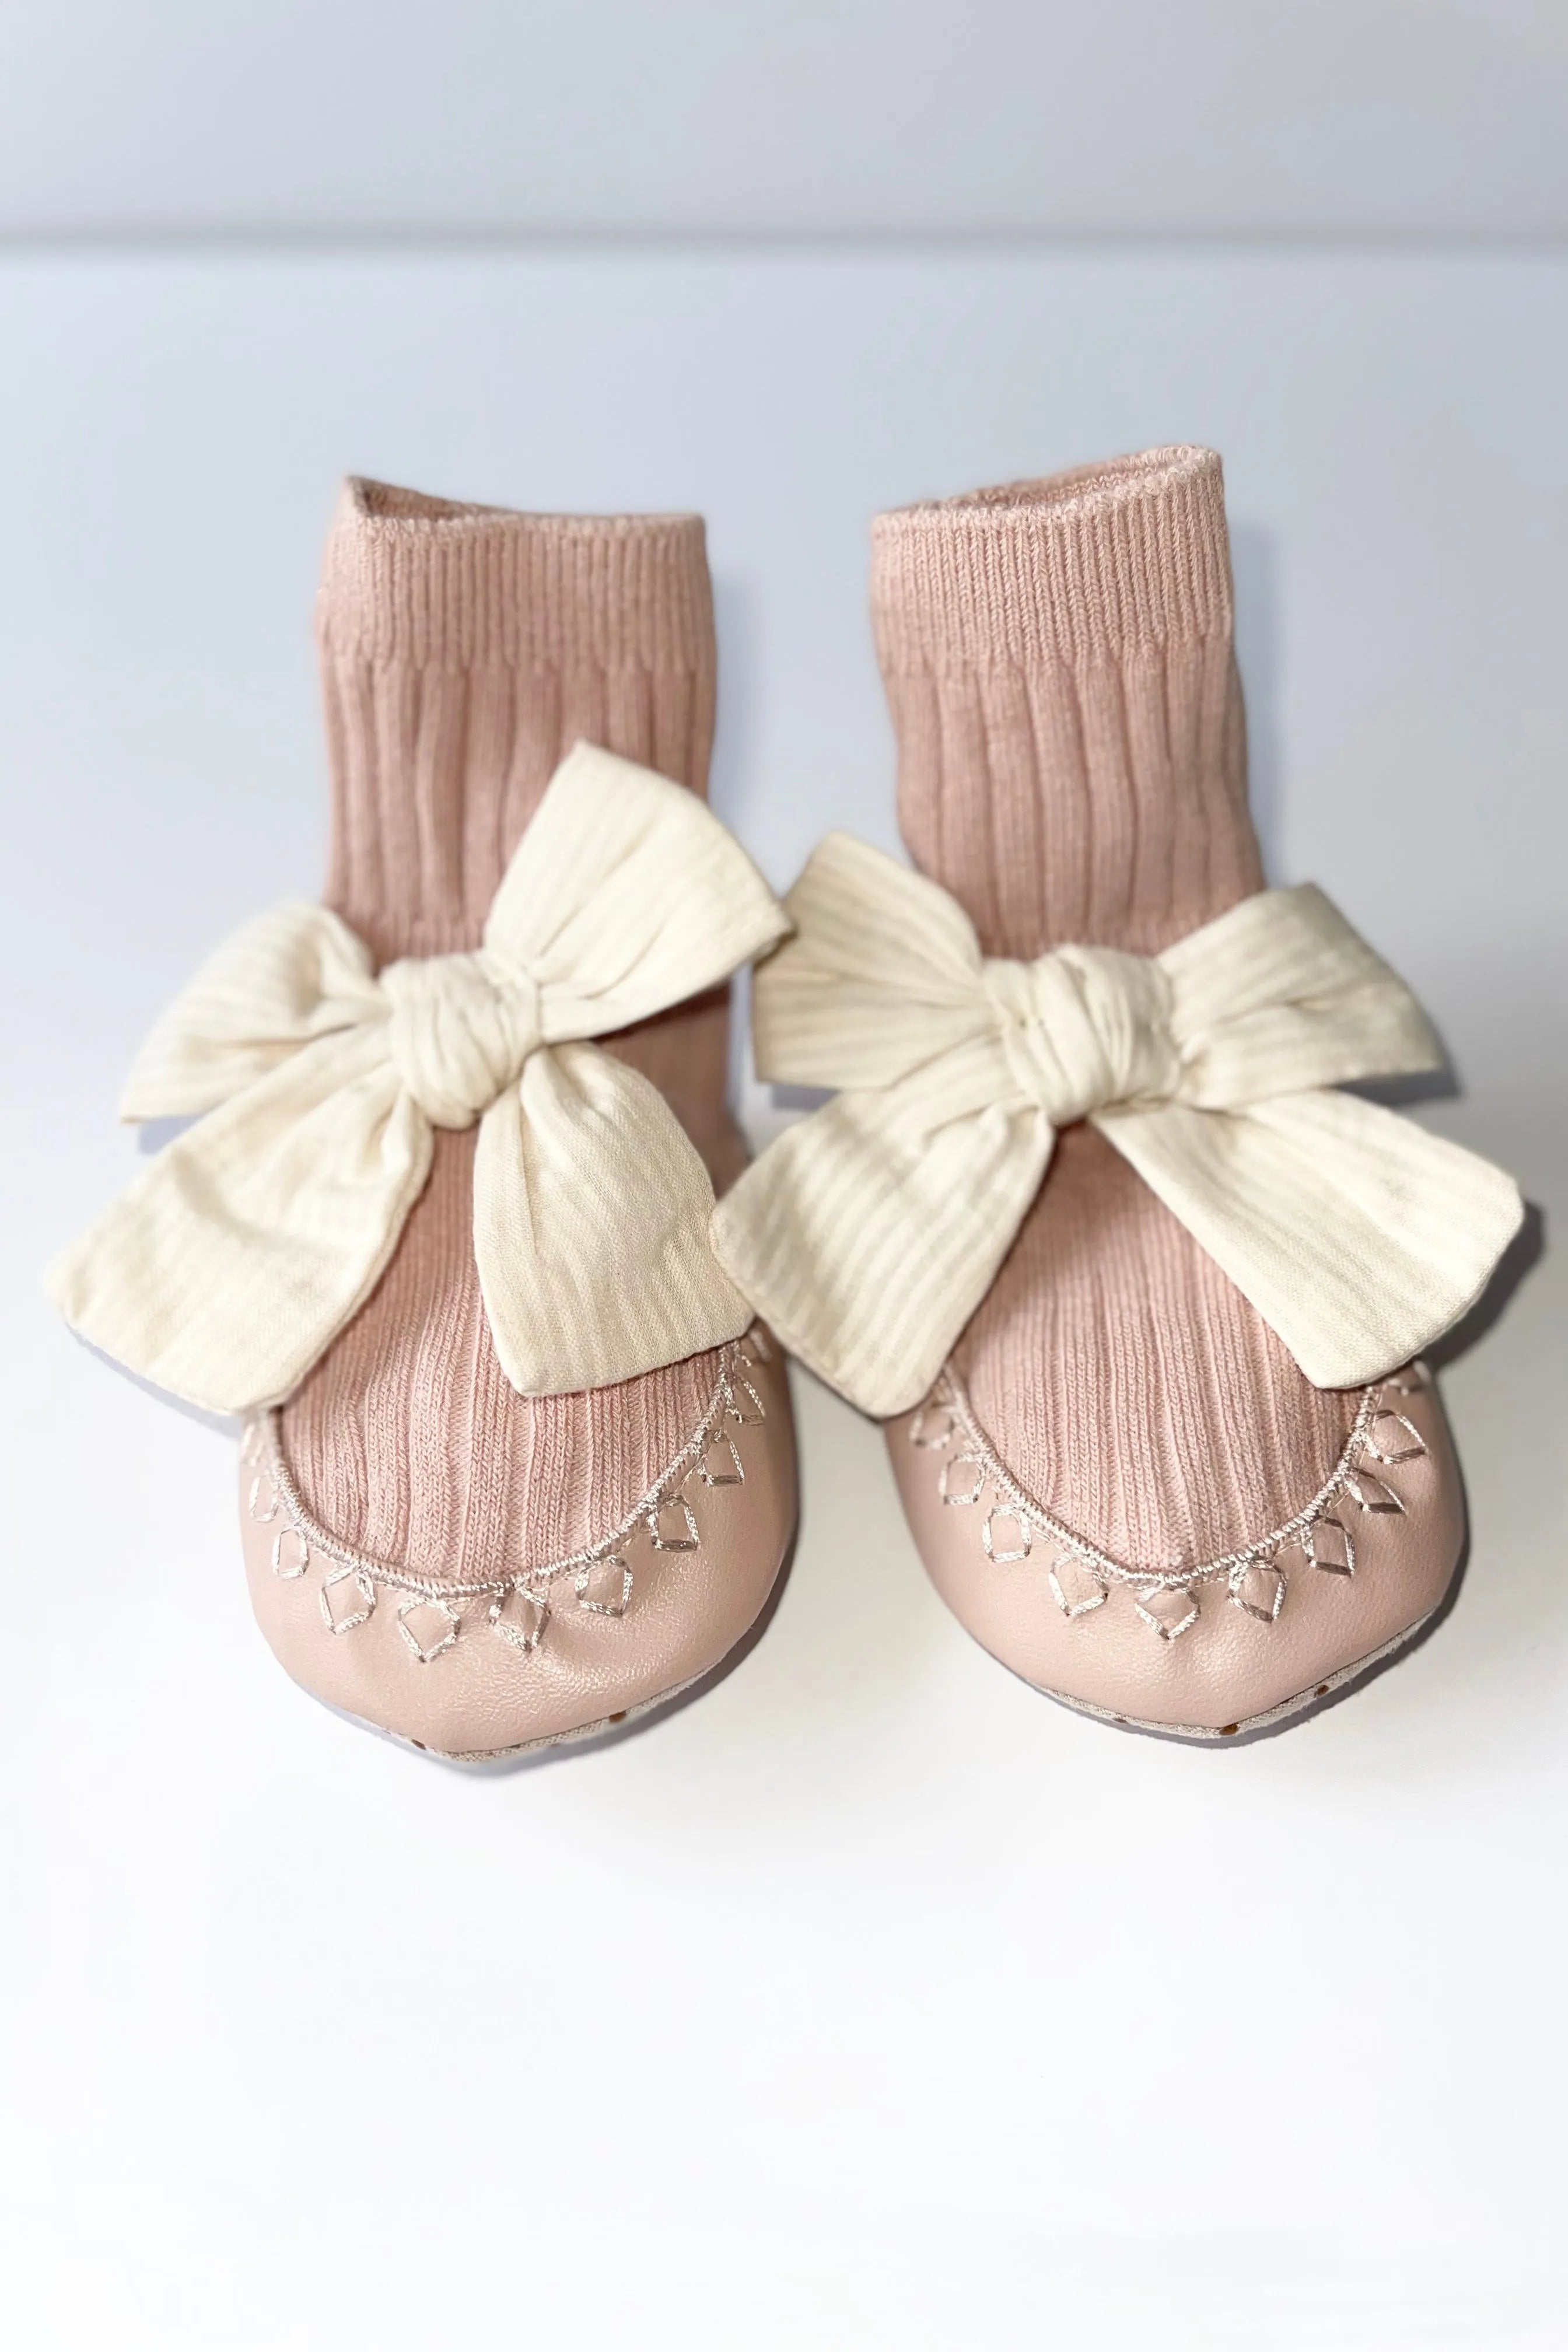 Pink/Cream Bow Baby Pram Boots - dainty delilah spanish childrens clothing